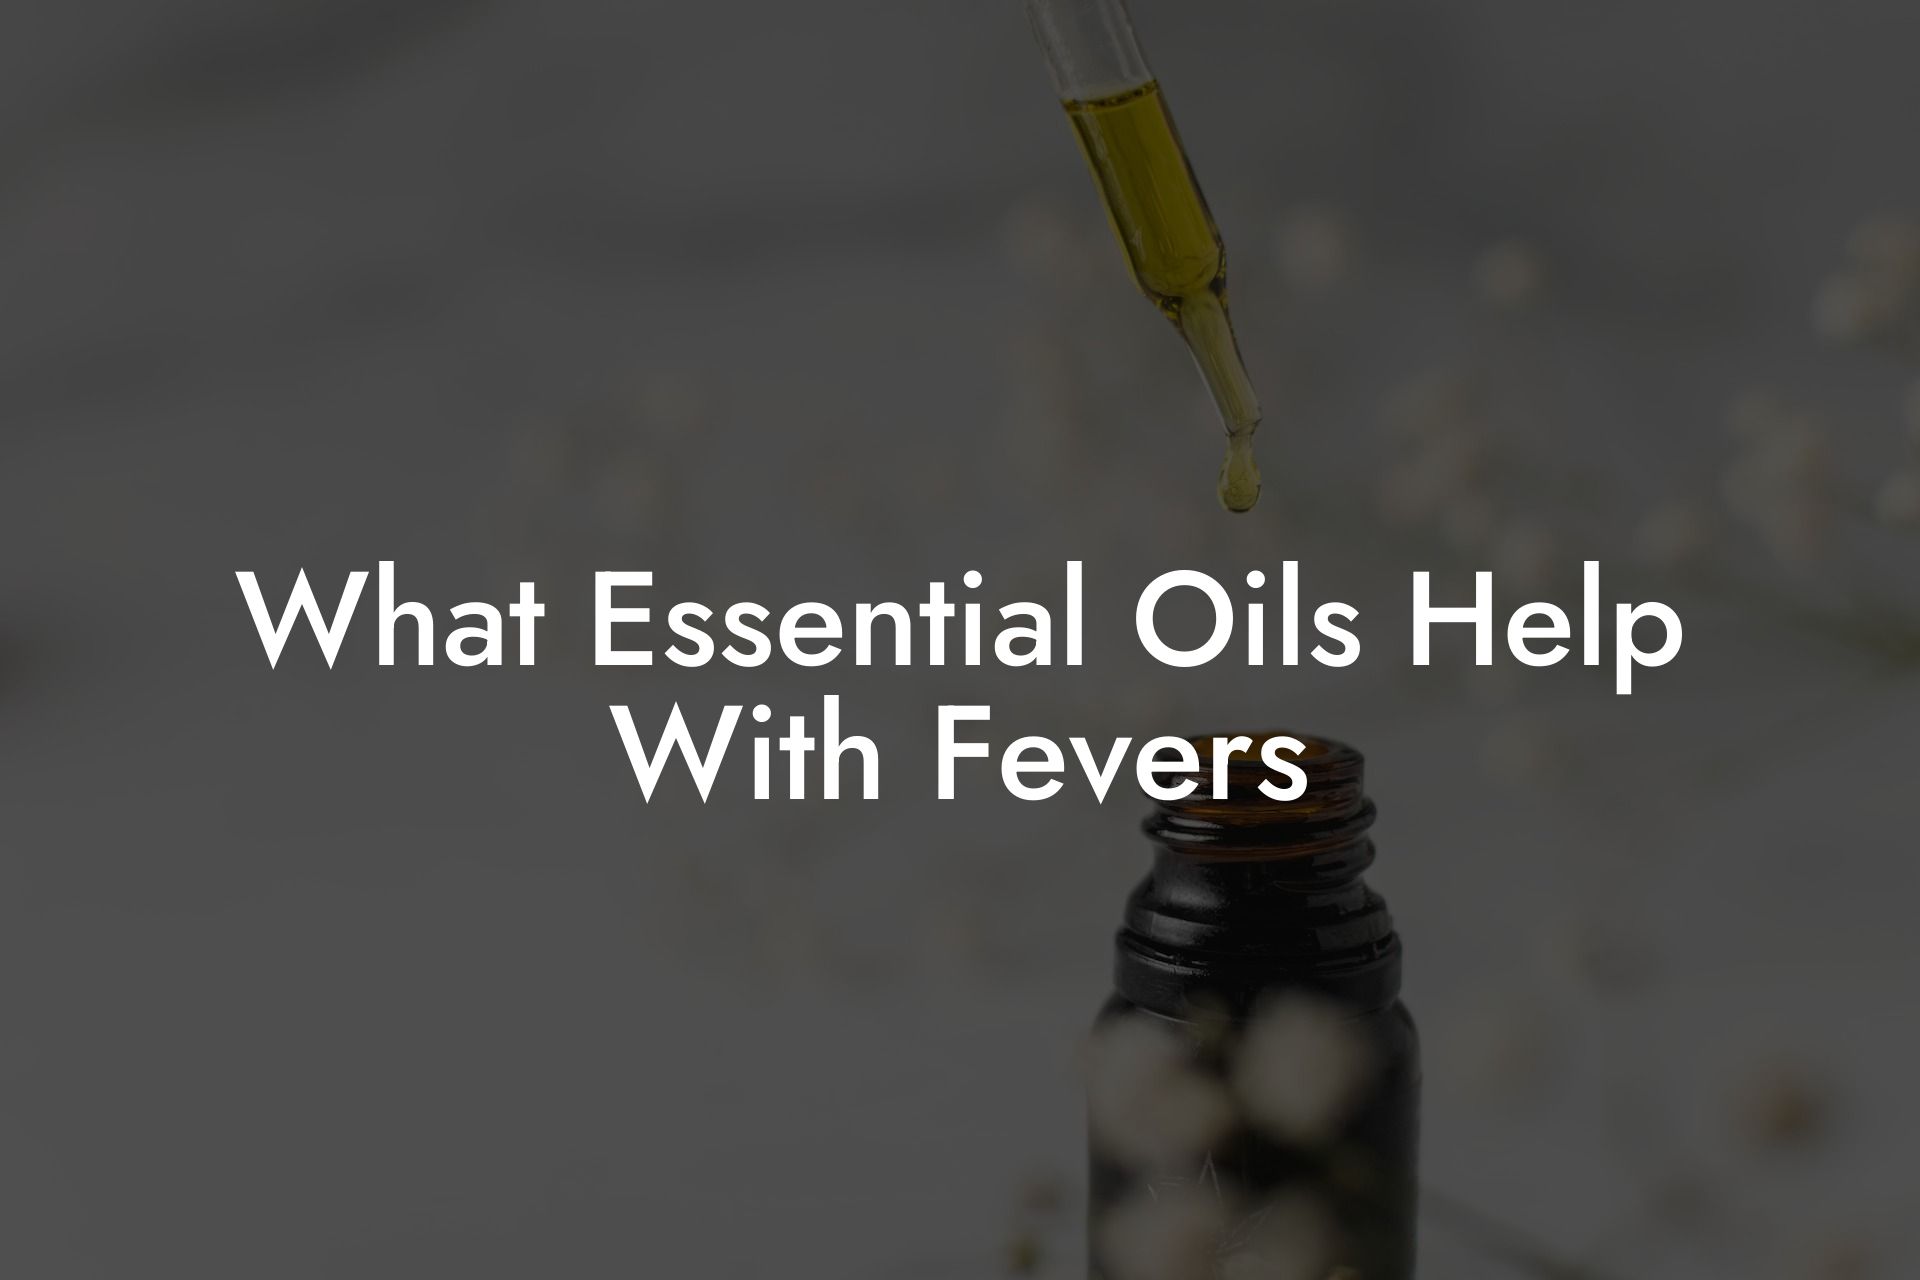 What Essential Oils Help With Fevers